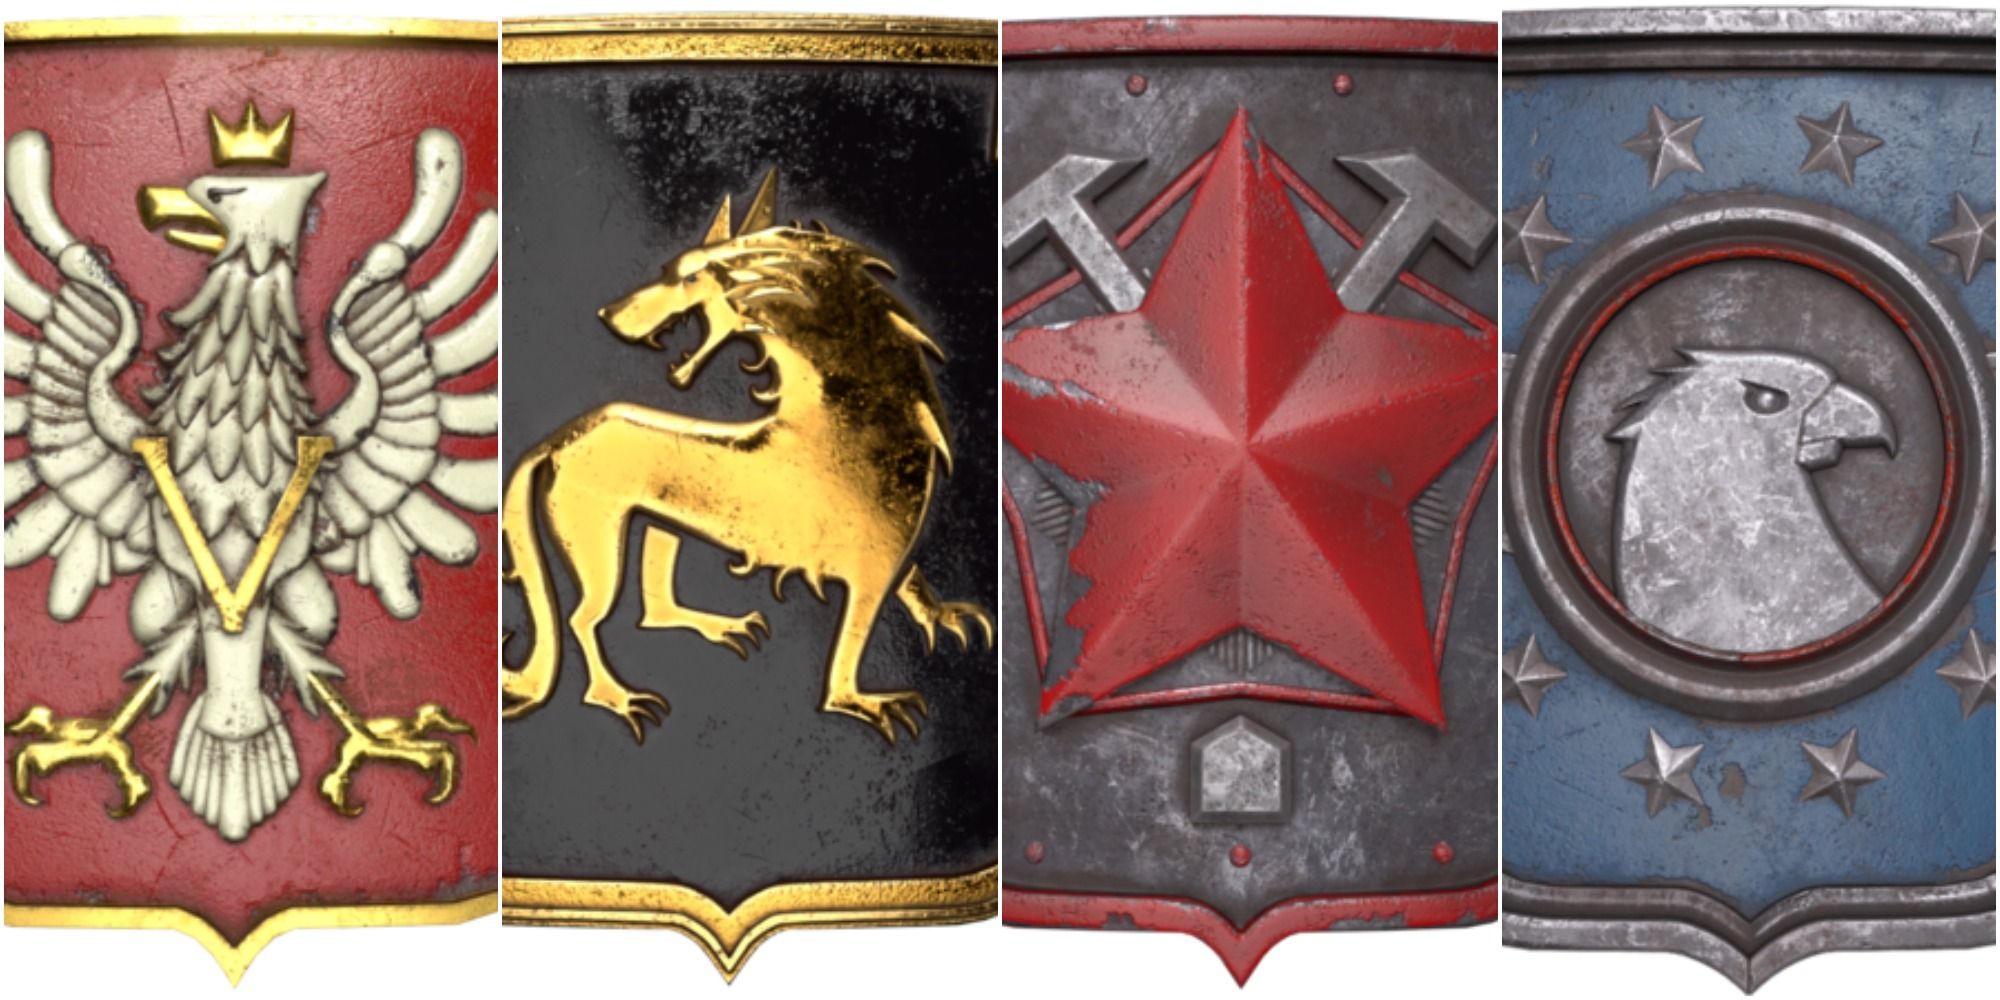 Iron Harvest Beginner Tips a collection of emblems from each of Iron Harvest's factions with the Polania Republic, Saxony Empire, Rusviet Tsardom and United Federation of Usonia from left to right